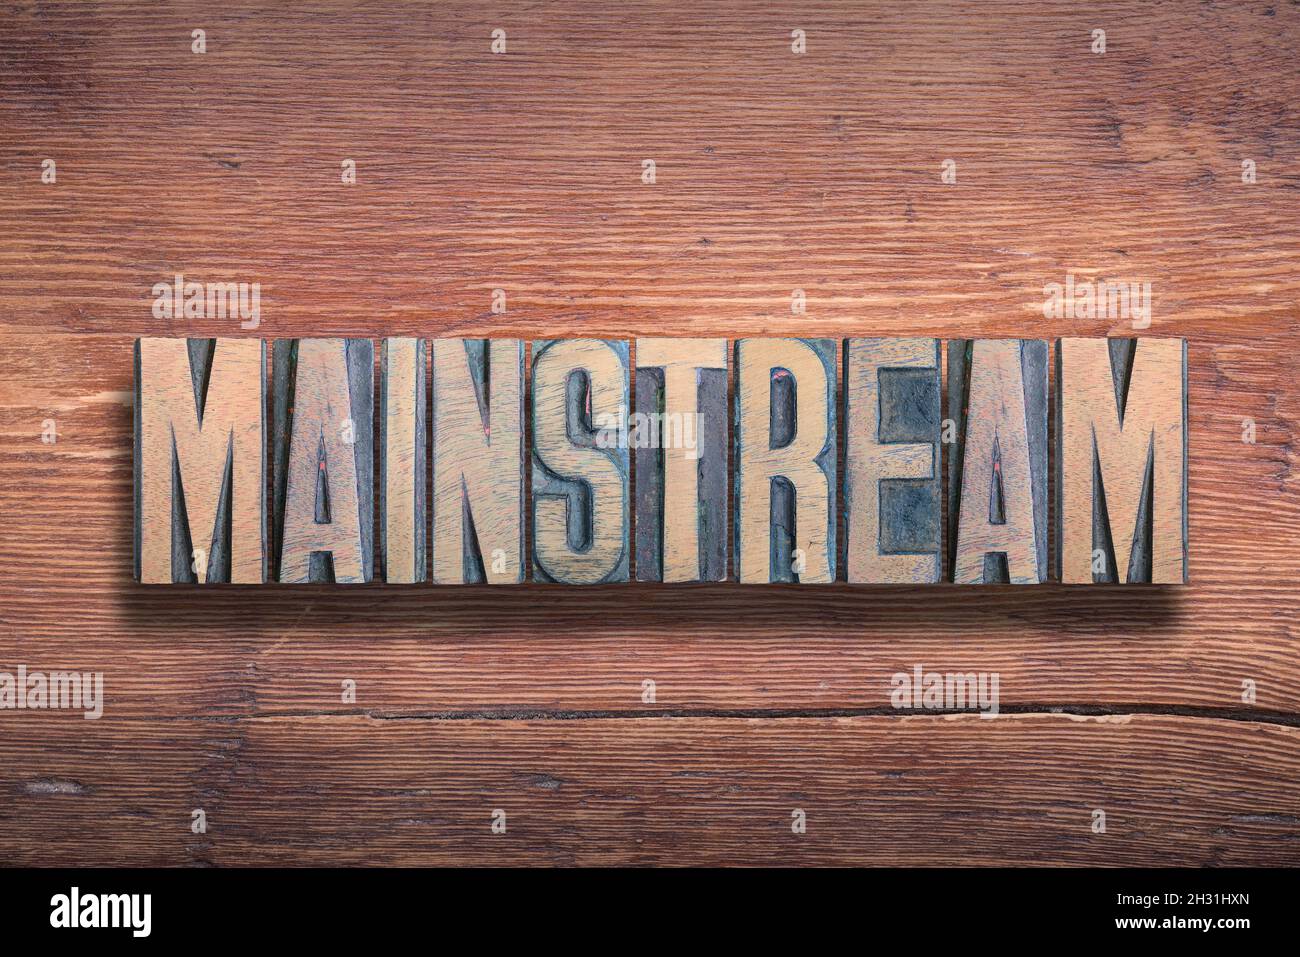 mainstream word combined on vintage varnished wooden surface Stock Photo